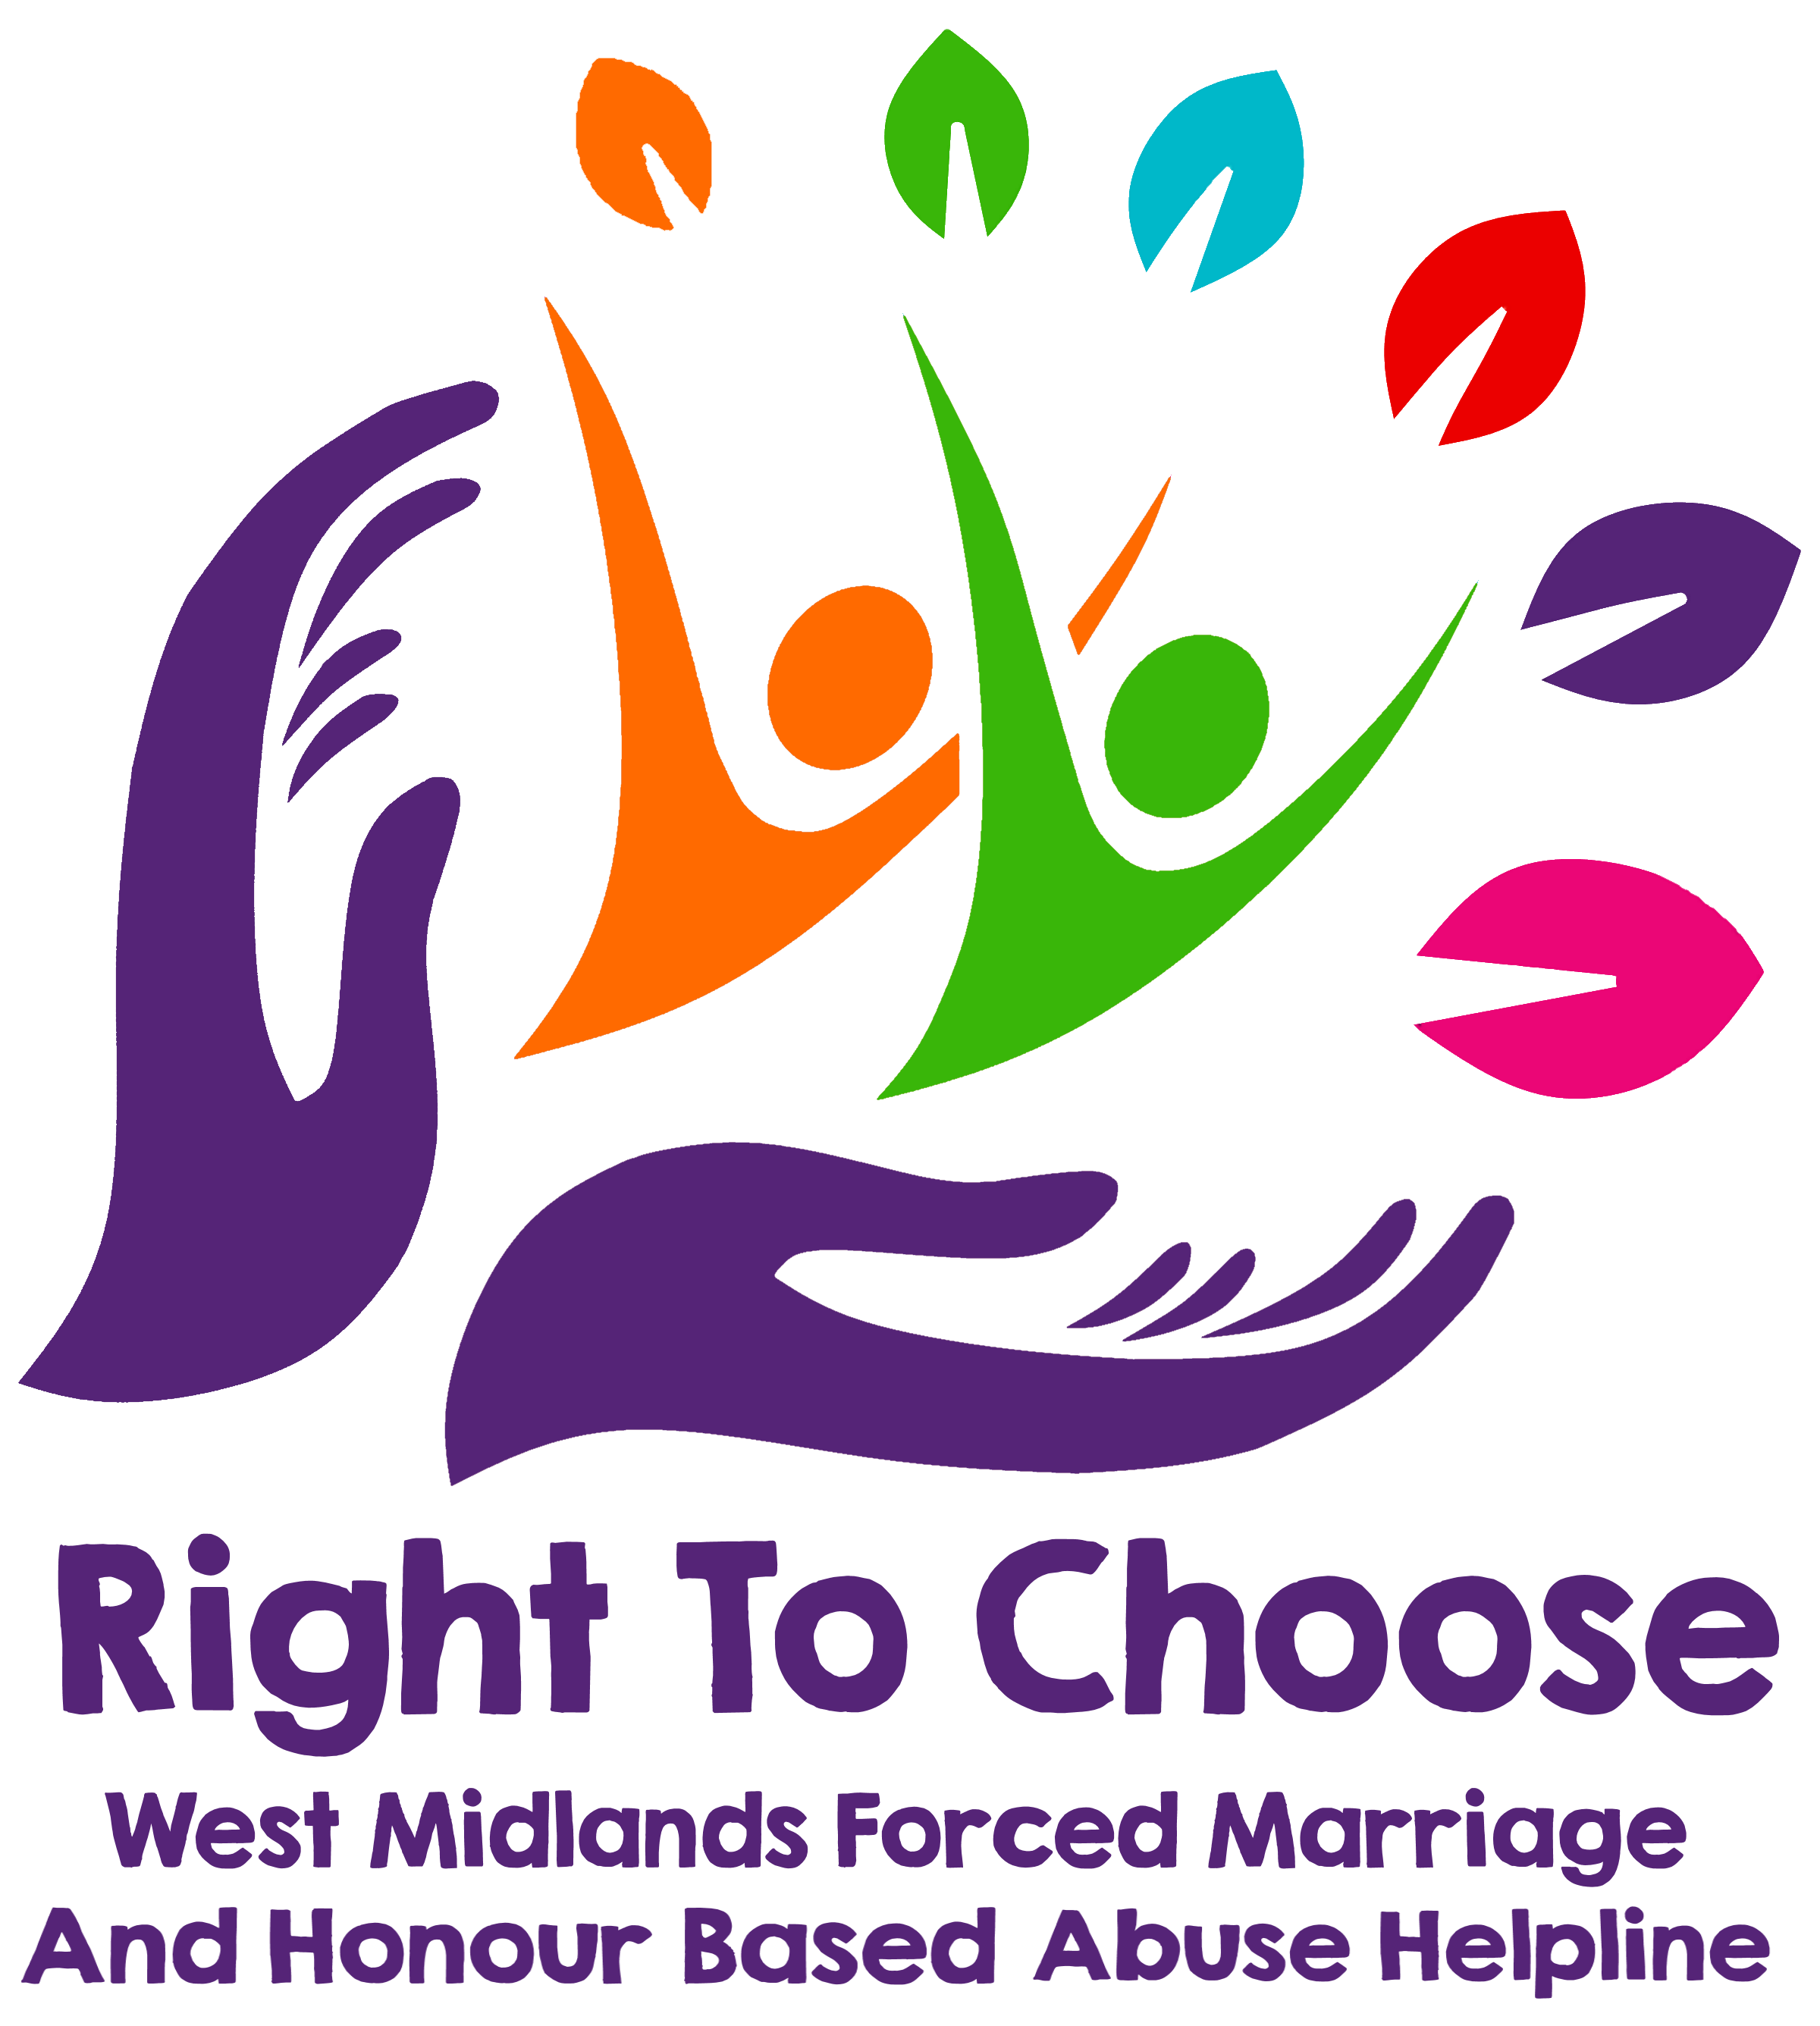 West Midl&s Forced Marriage & Honour Based Abuse Helpline